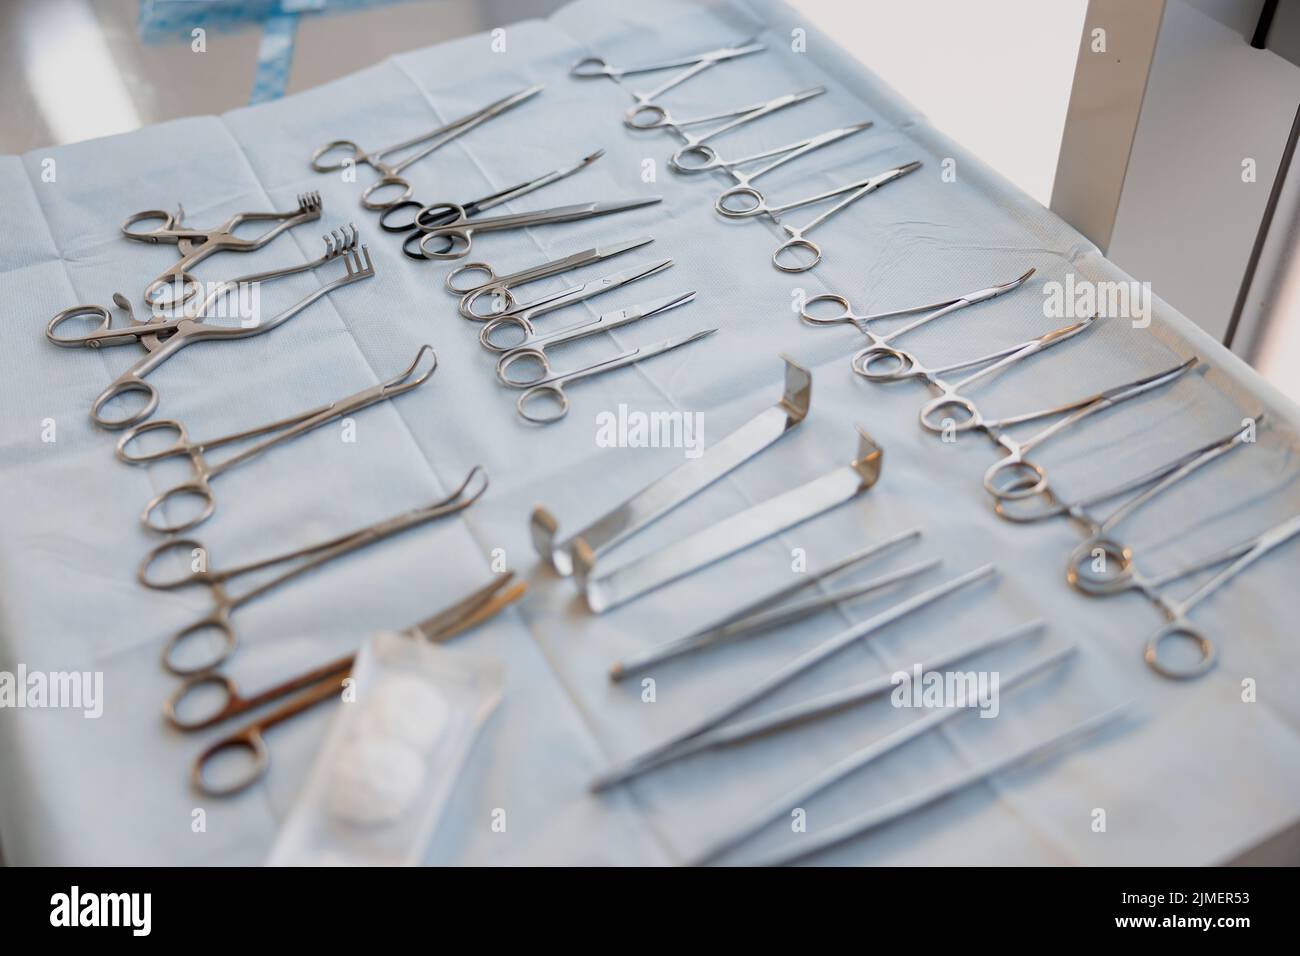 Surgical instruments and tools including scalpels forceps and tweezers arranged on table for surgery Stock Photo